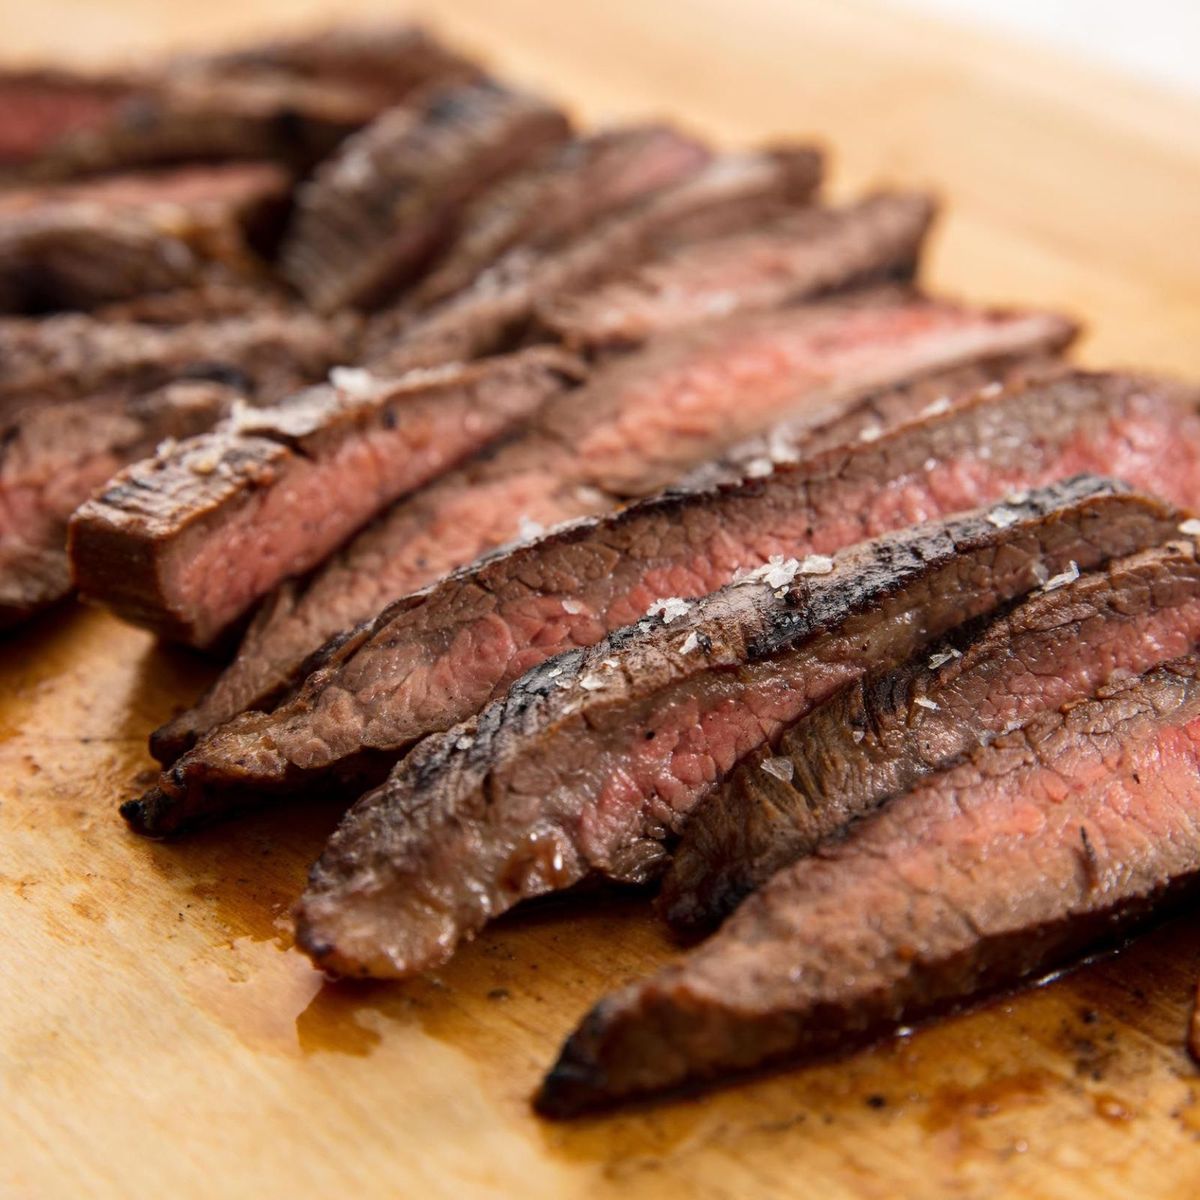 How Long to Cook Your Steak